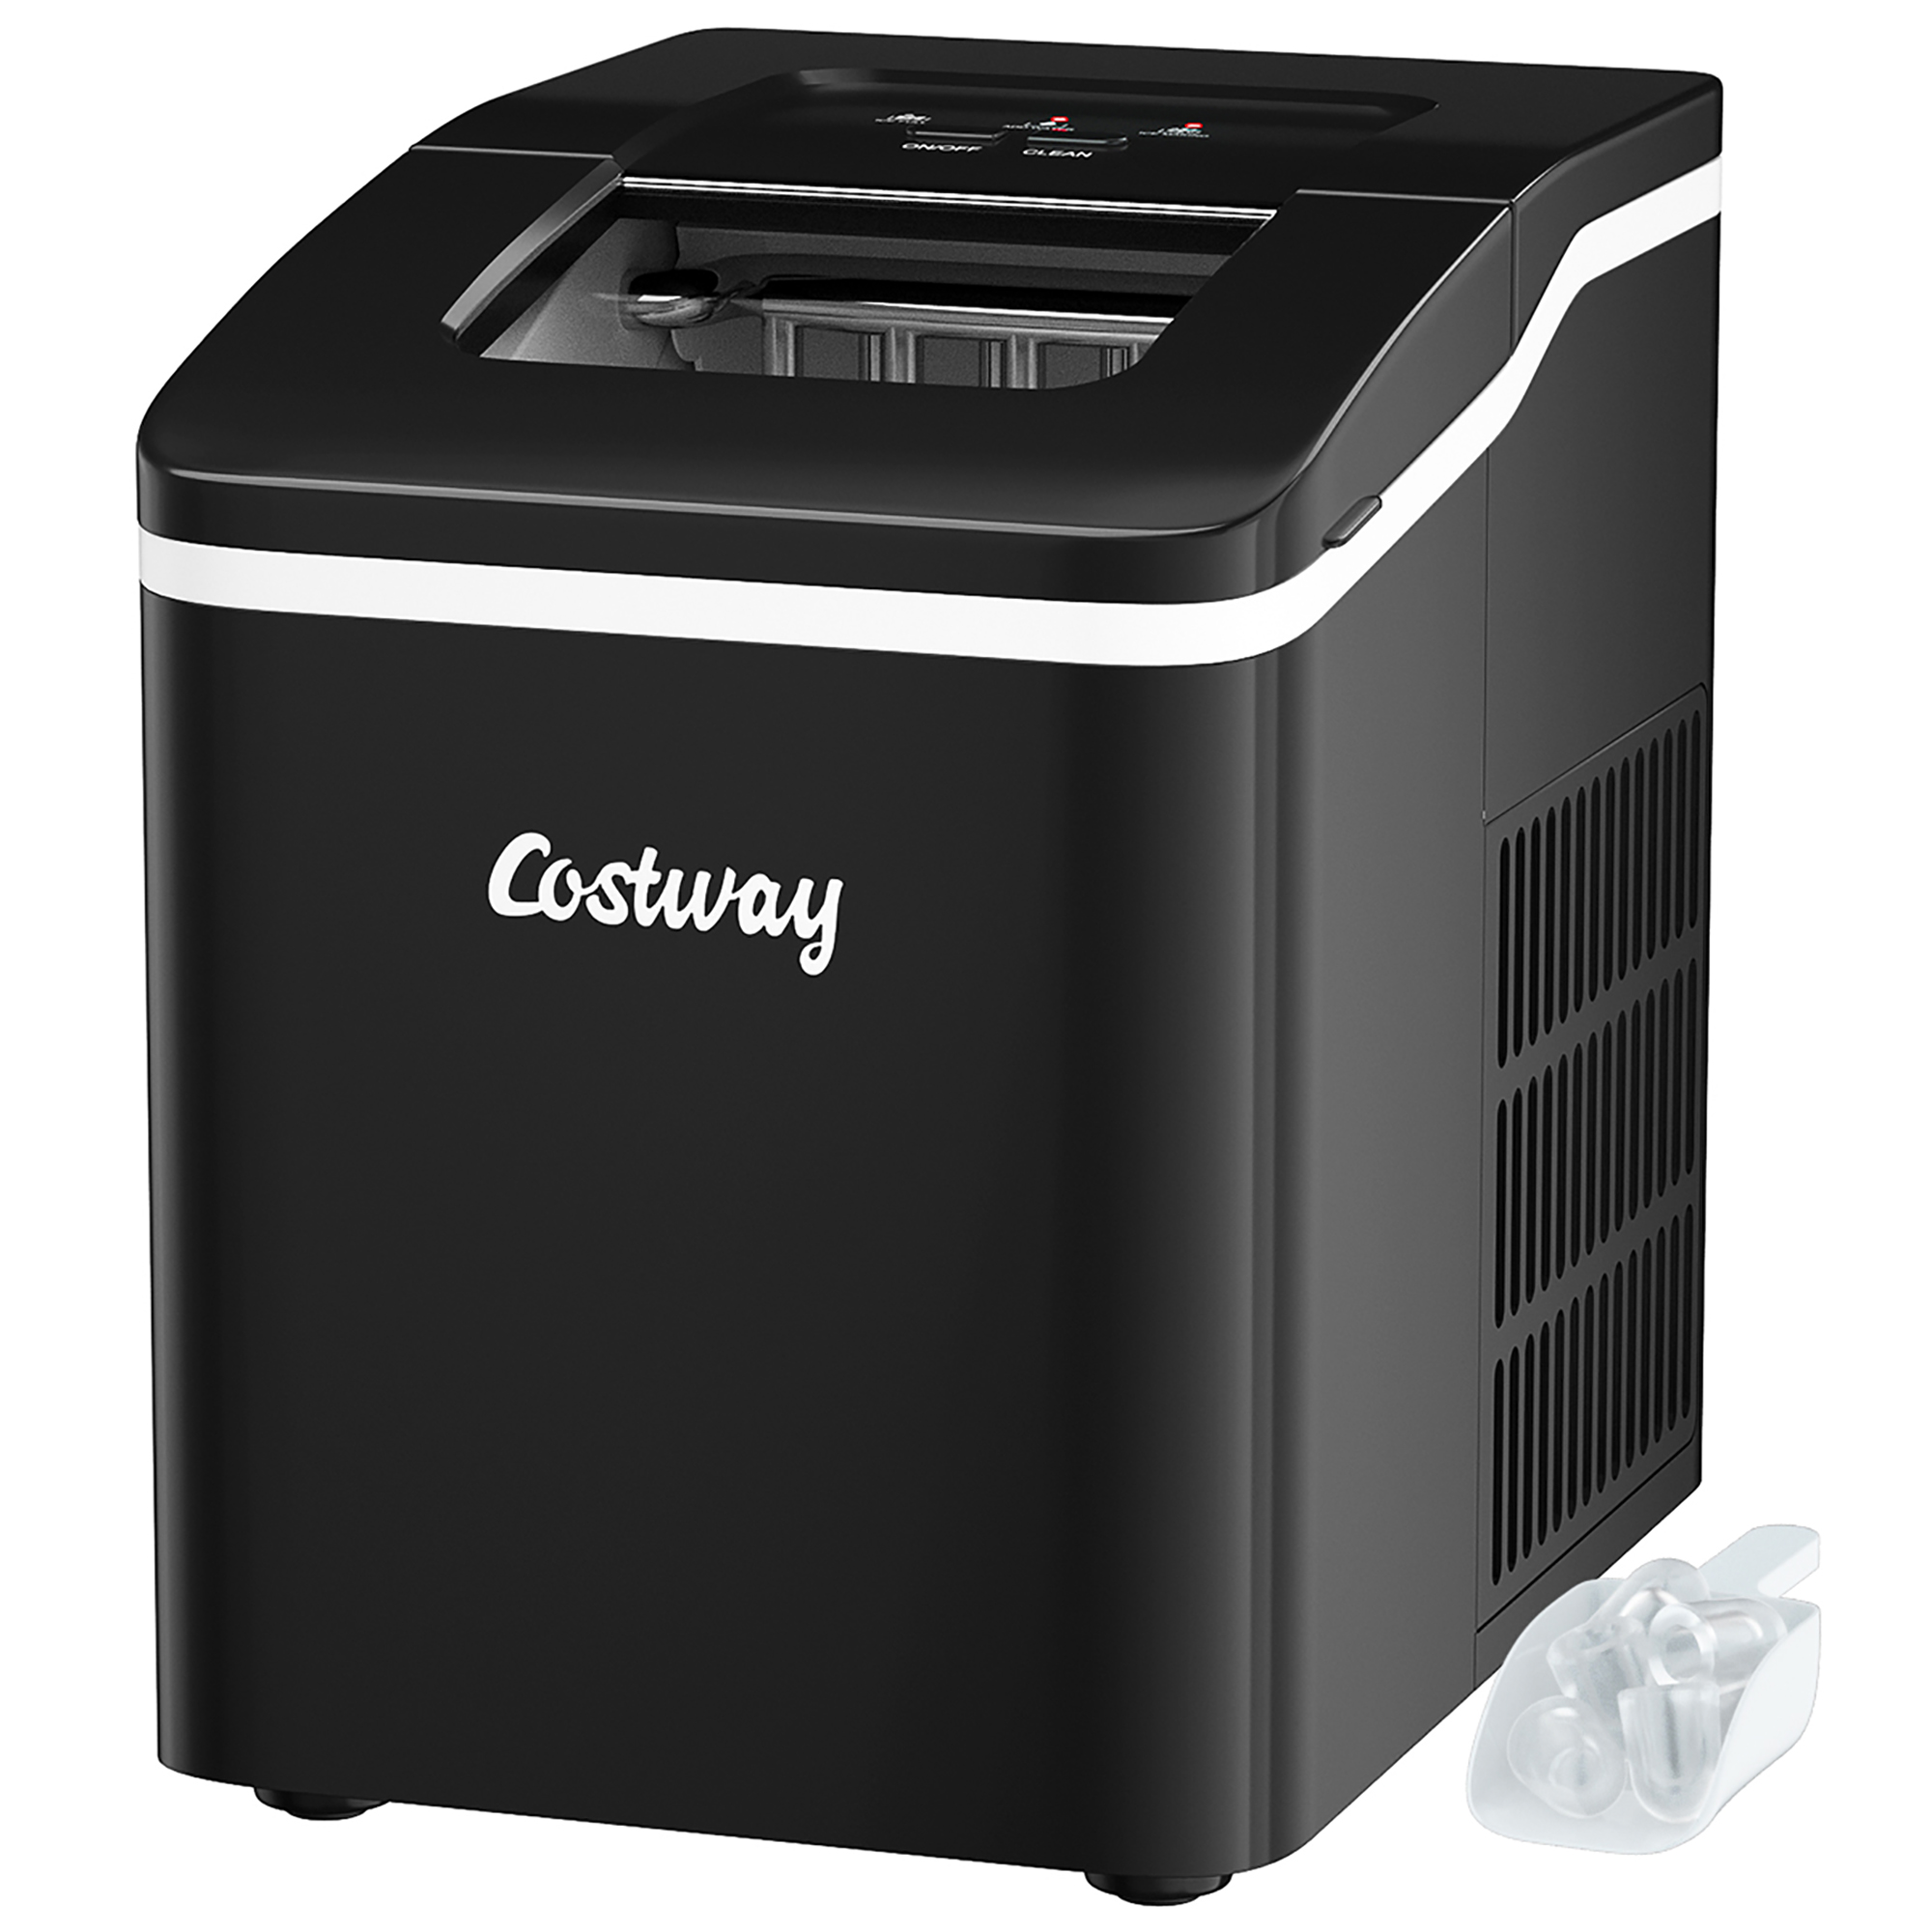 Costway Portable Ice Maker Machine Countertop 26Lbs/24H Self-cleaning w/ Scoop Black - image 1 of 10